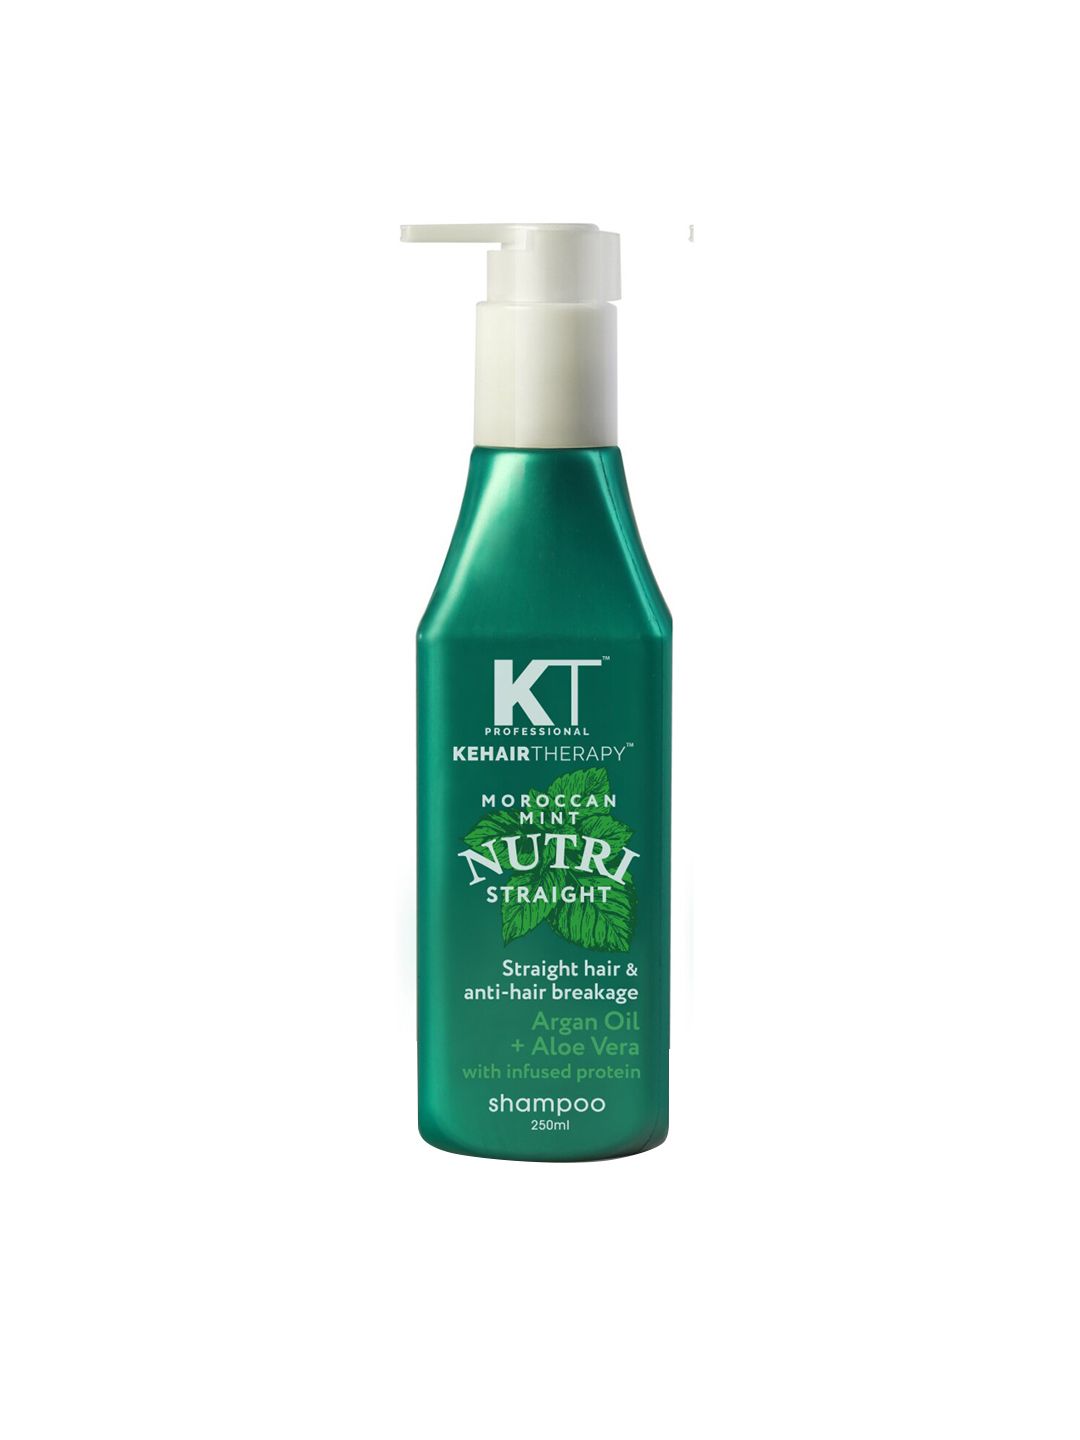 KEHAIRTHERAPY KT Professional Nutri Straight Shampoo 250 ml Price in India